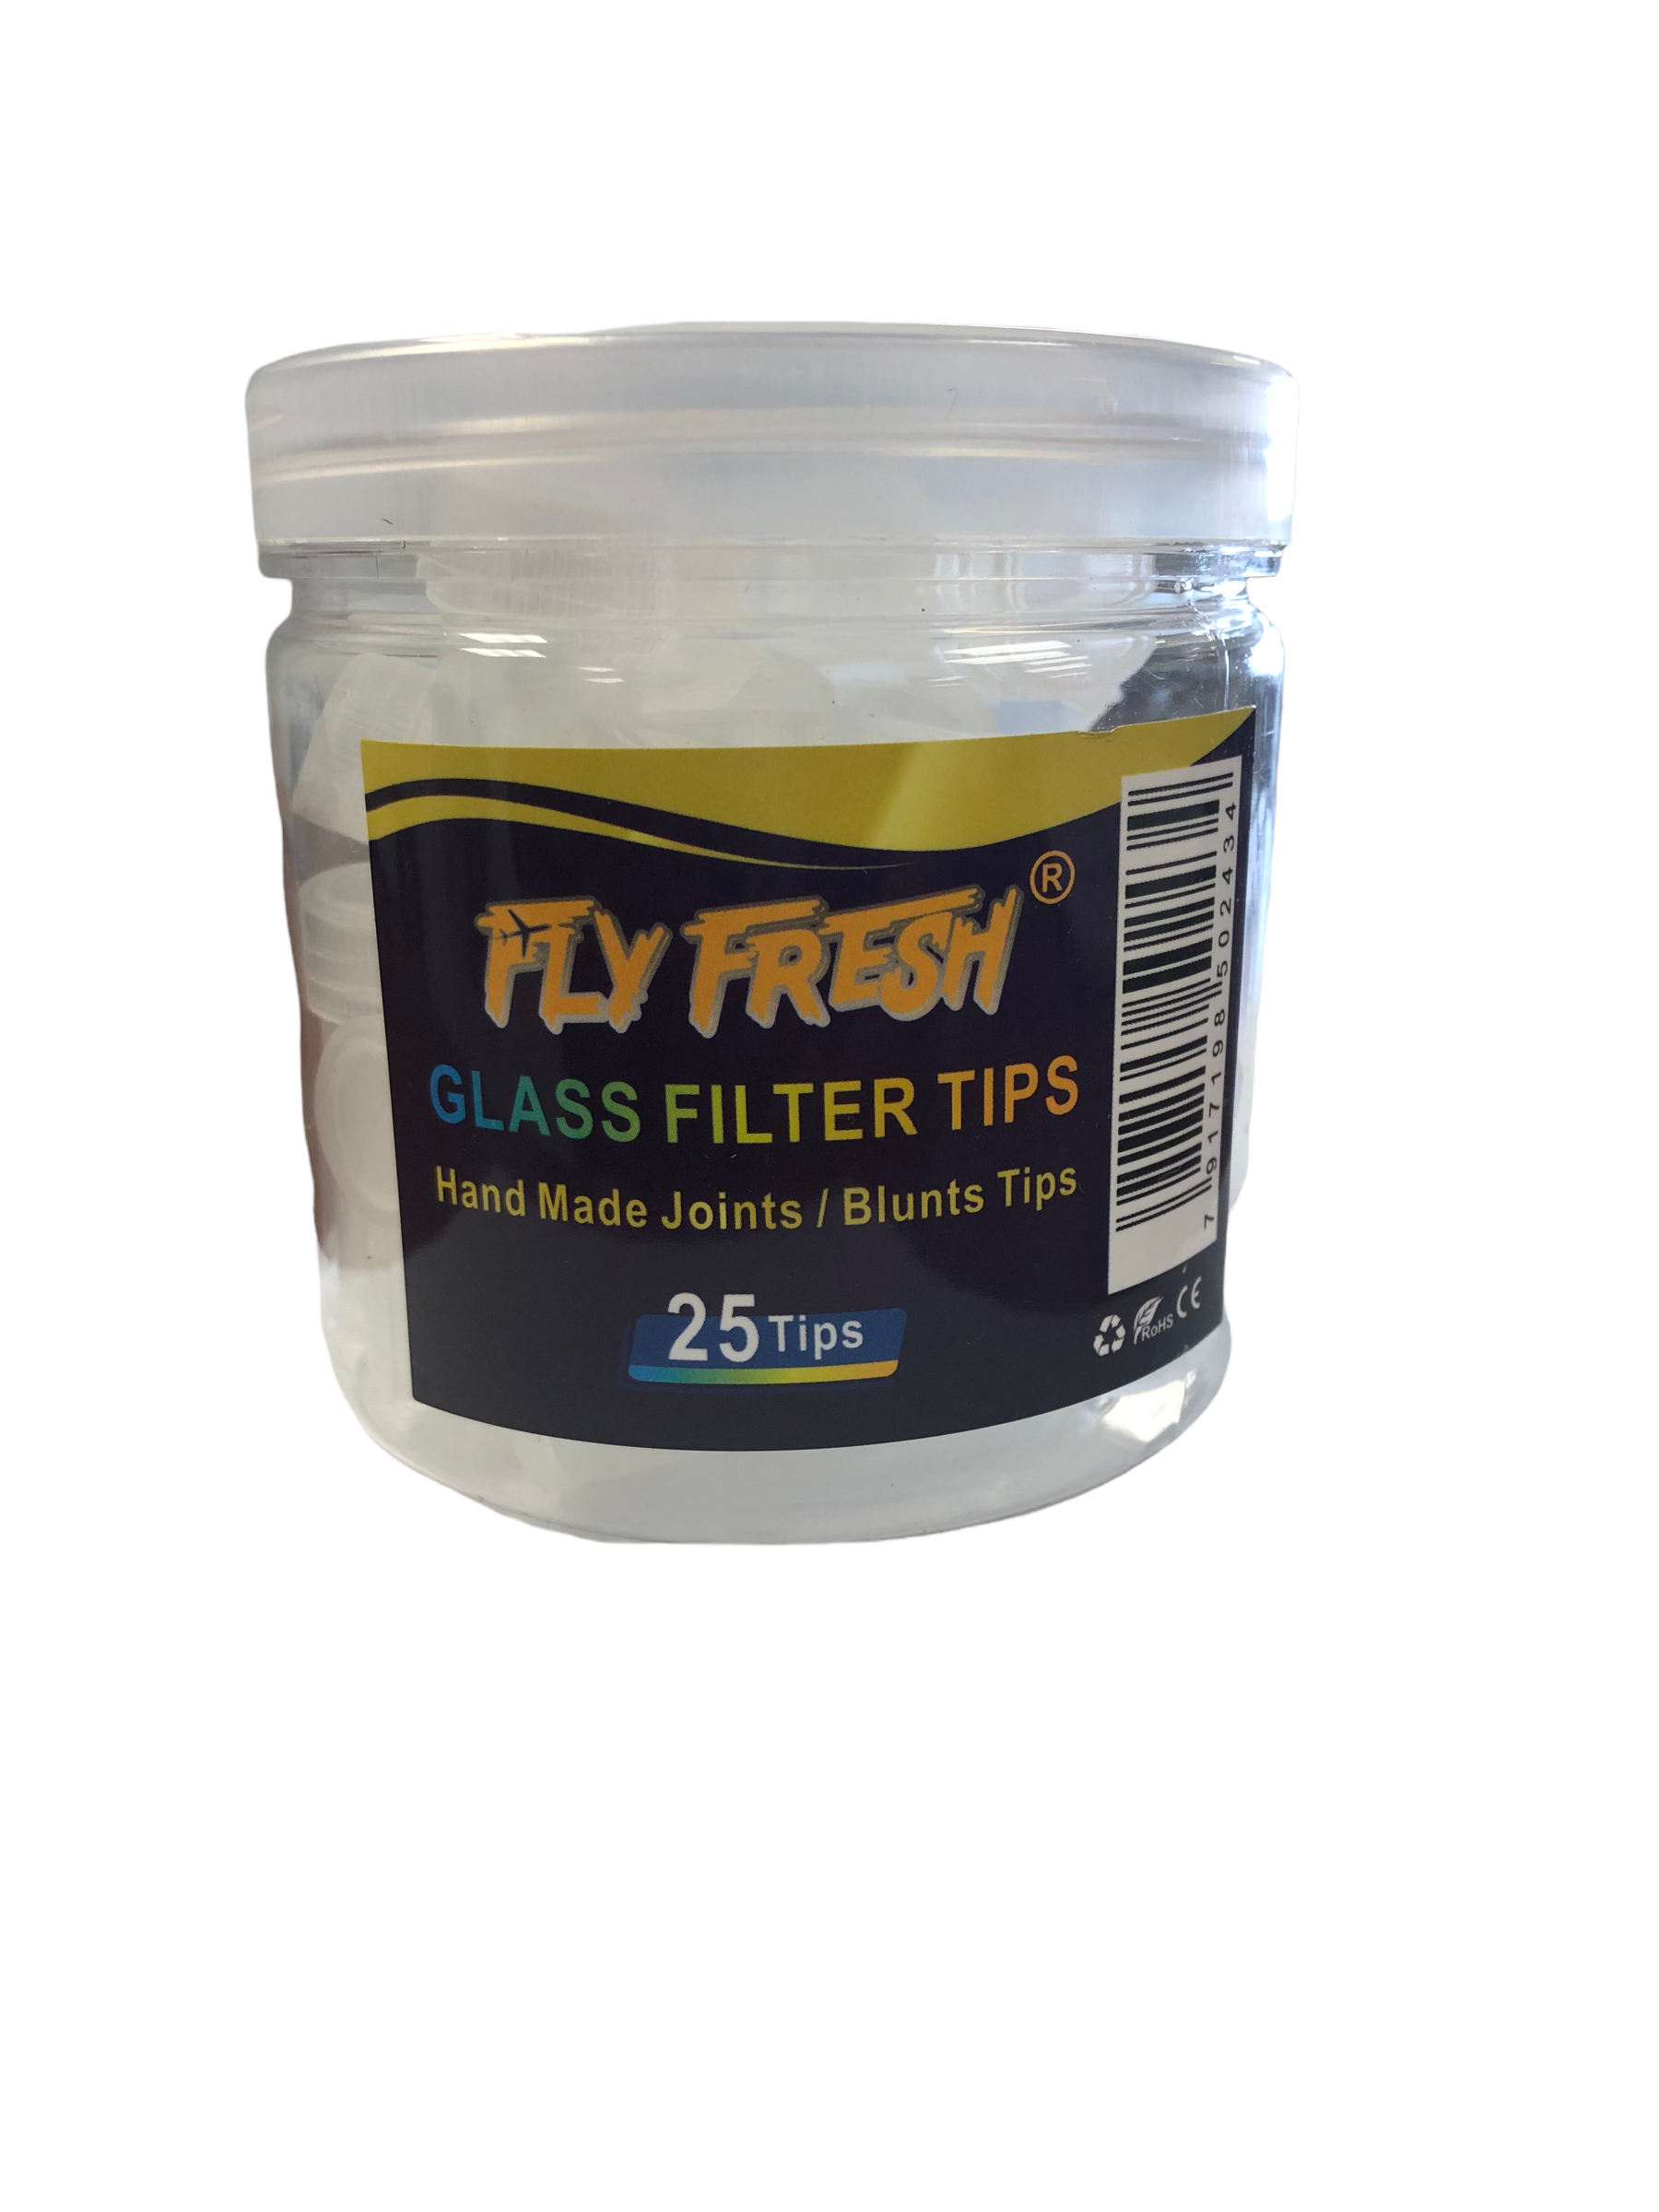 FLY FRESH | GLASS FILTER TIPS 25 CT